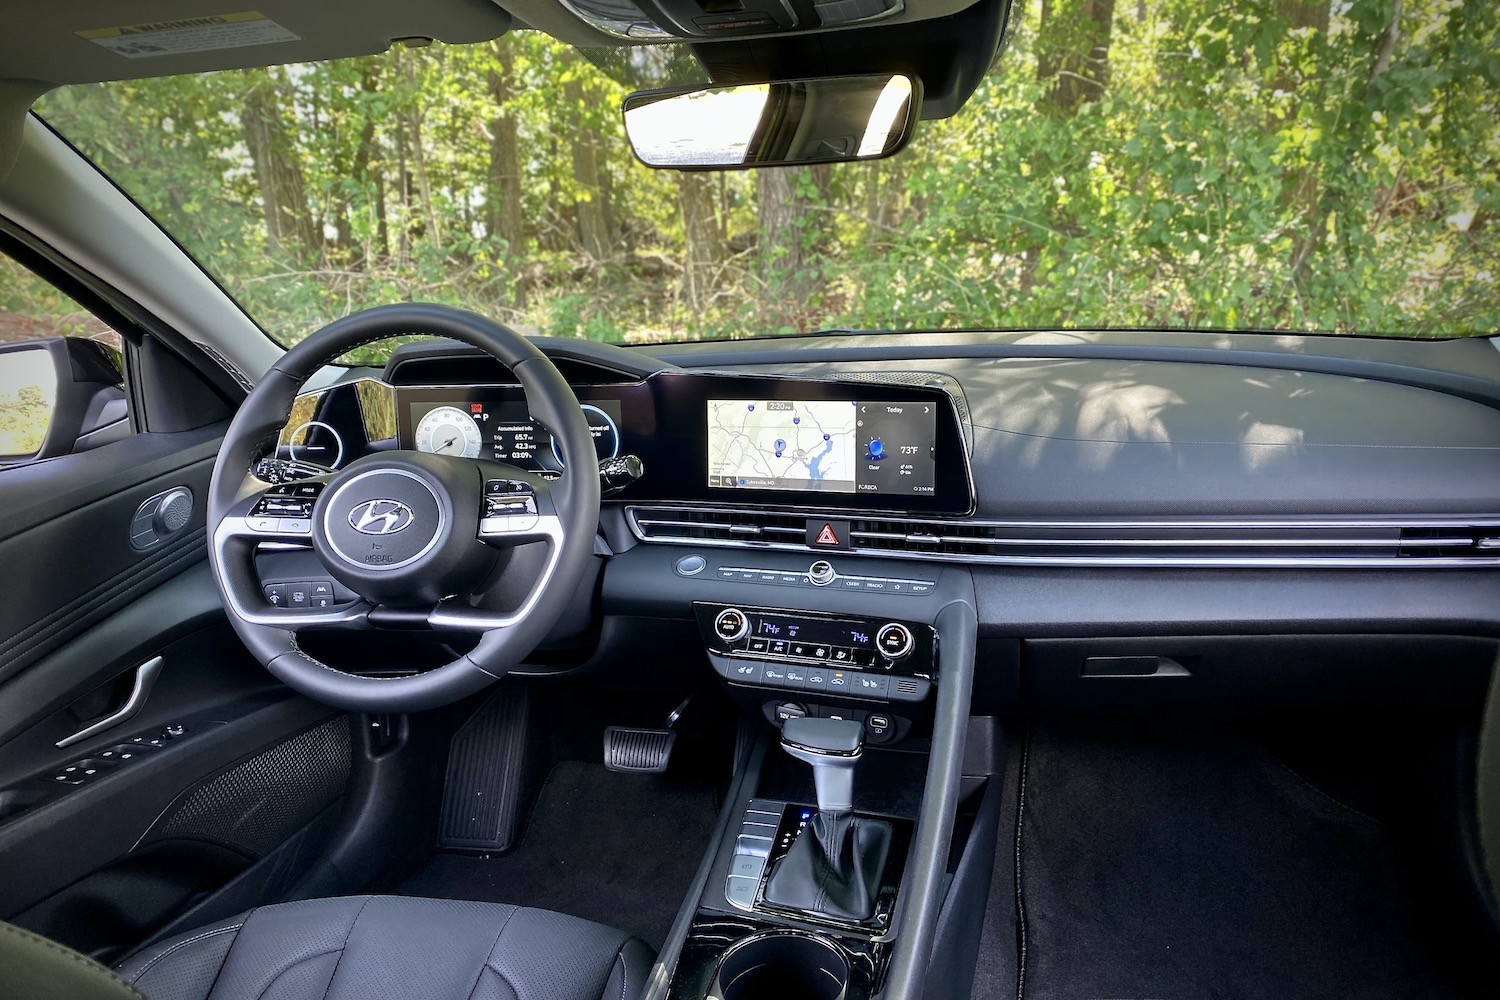 Dashboard, center console, and steering wheel of the 2021 Hyundai Elantra Hybrid from the rear seats.